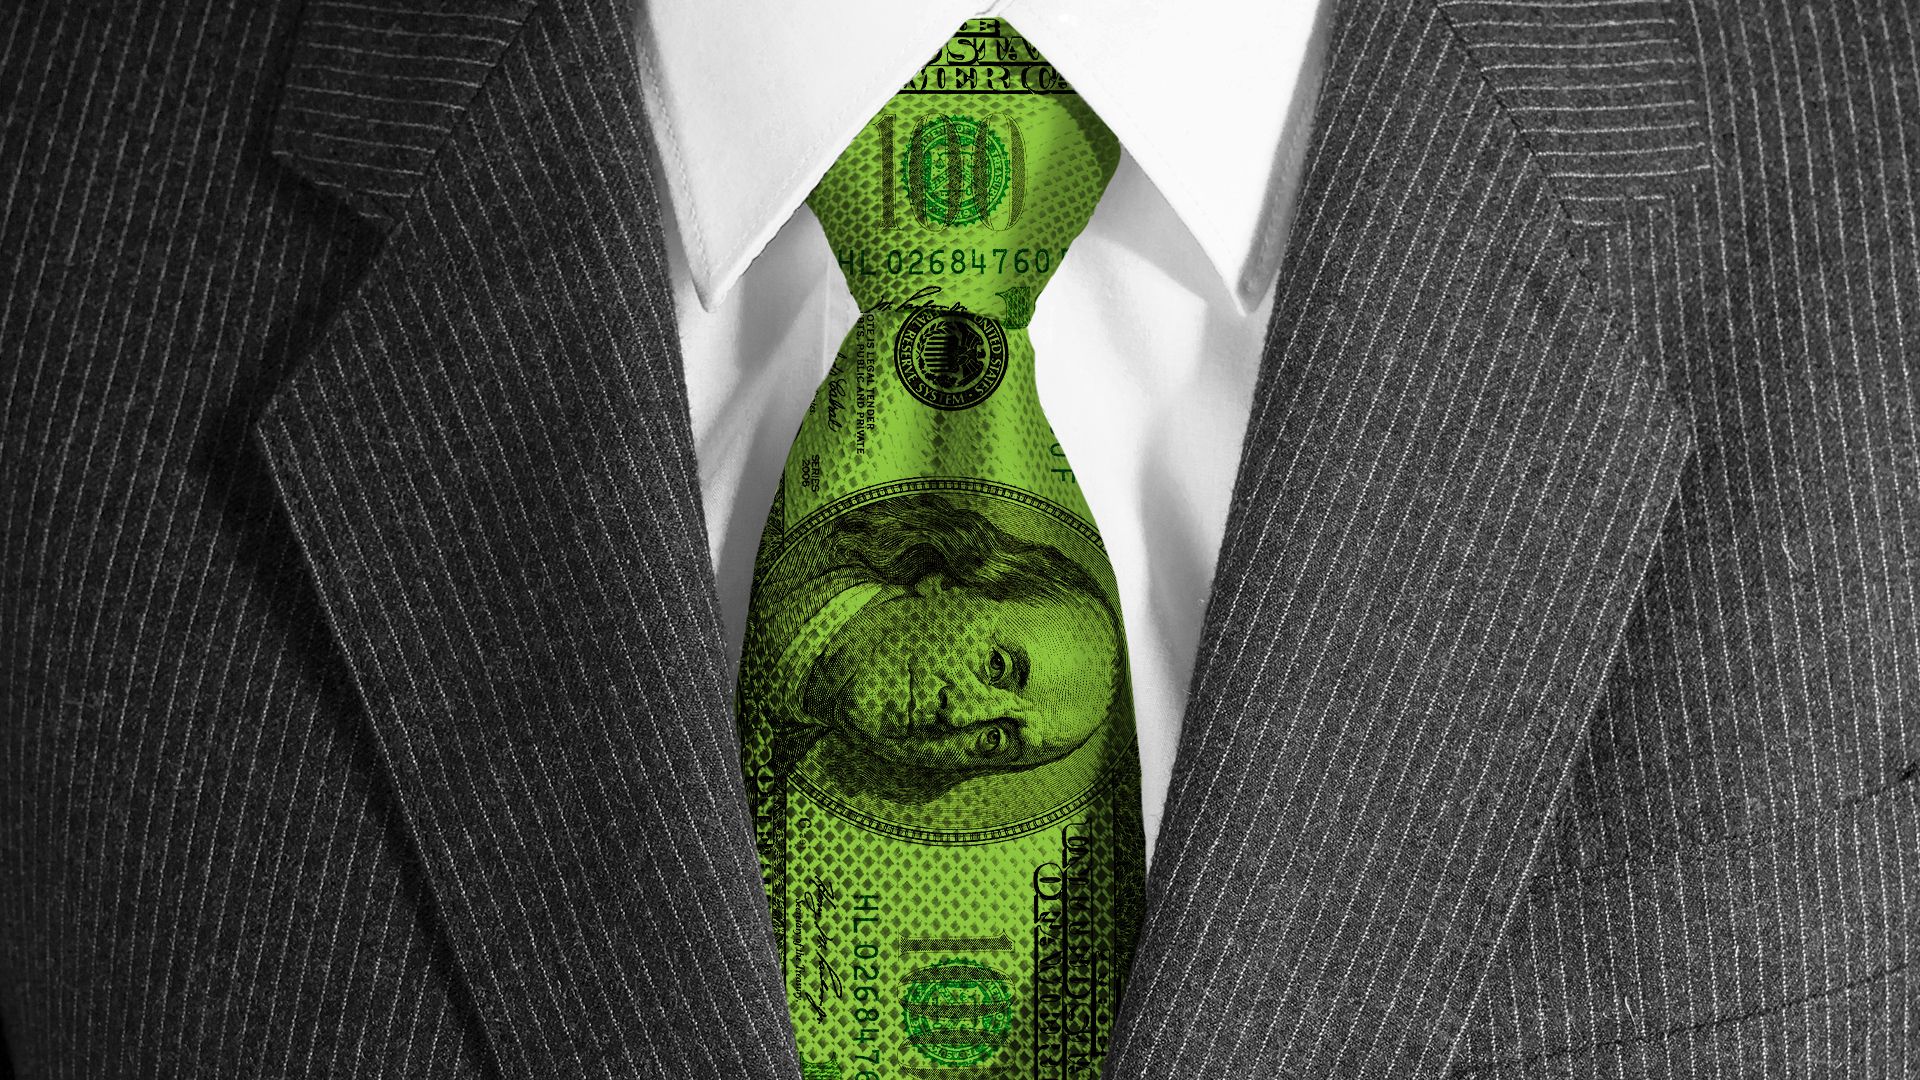 Illustration of a close up on a suit and tie with the tie made of a hundred dollar bill.